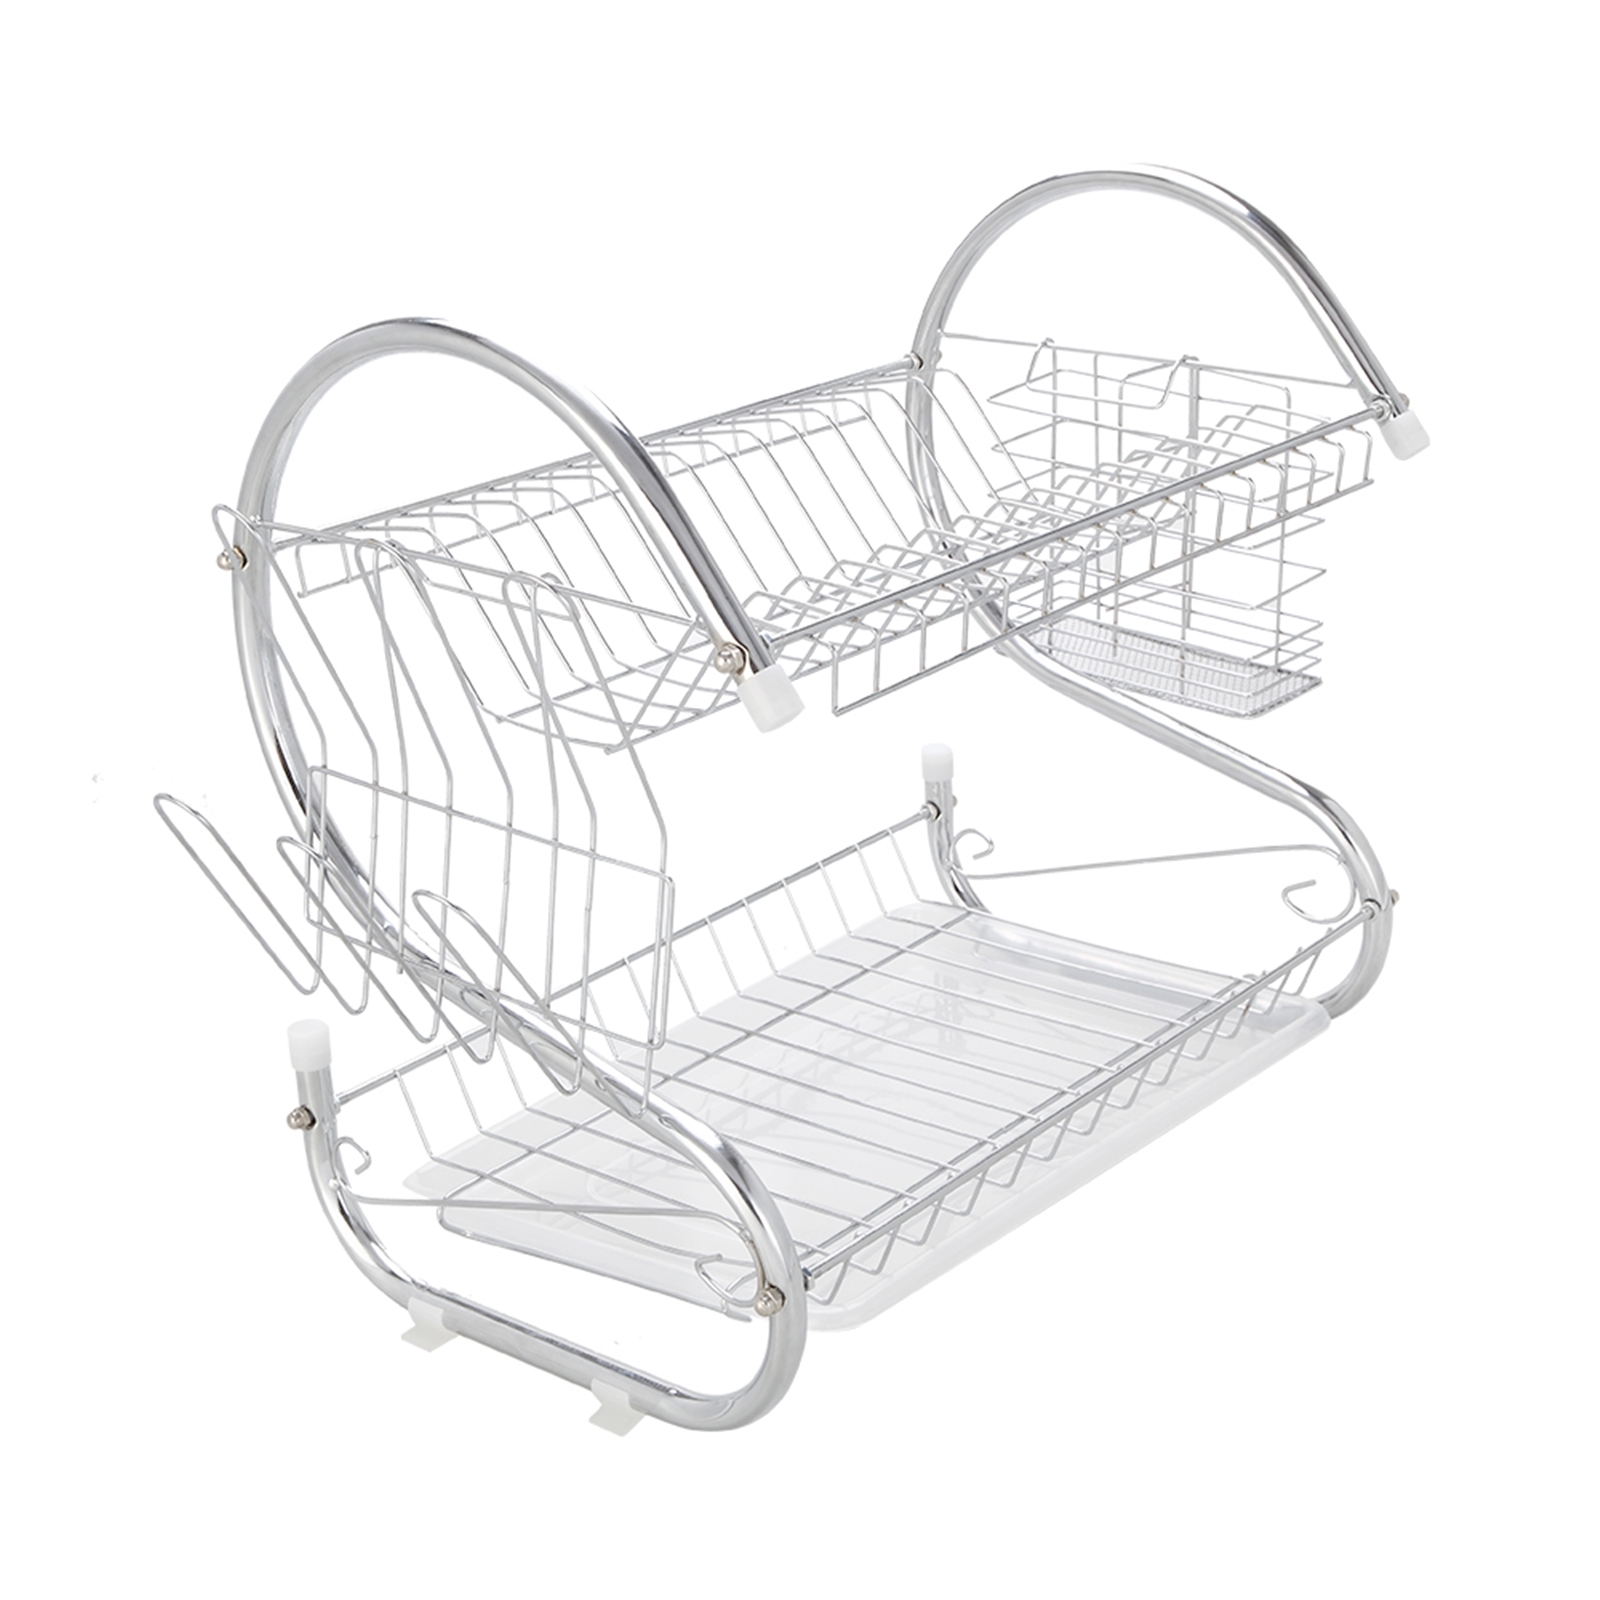 Good world Hot Sale 2-Tier Stainless Steel Silver Dish Rack with Drainboard - image 1 of 7